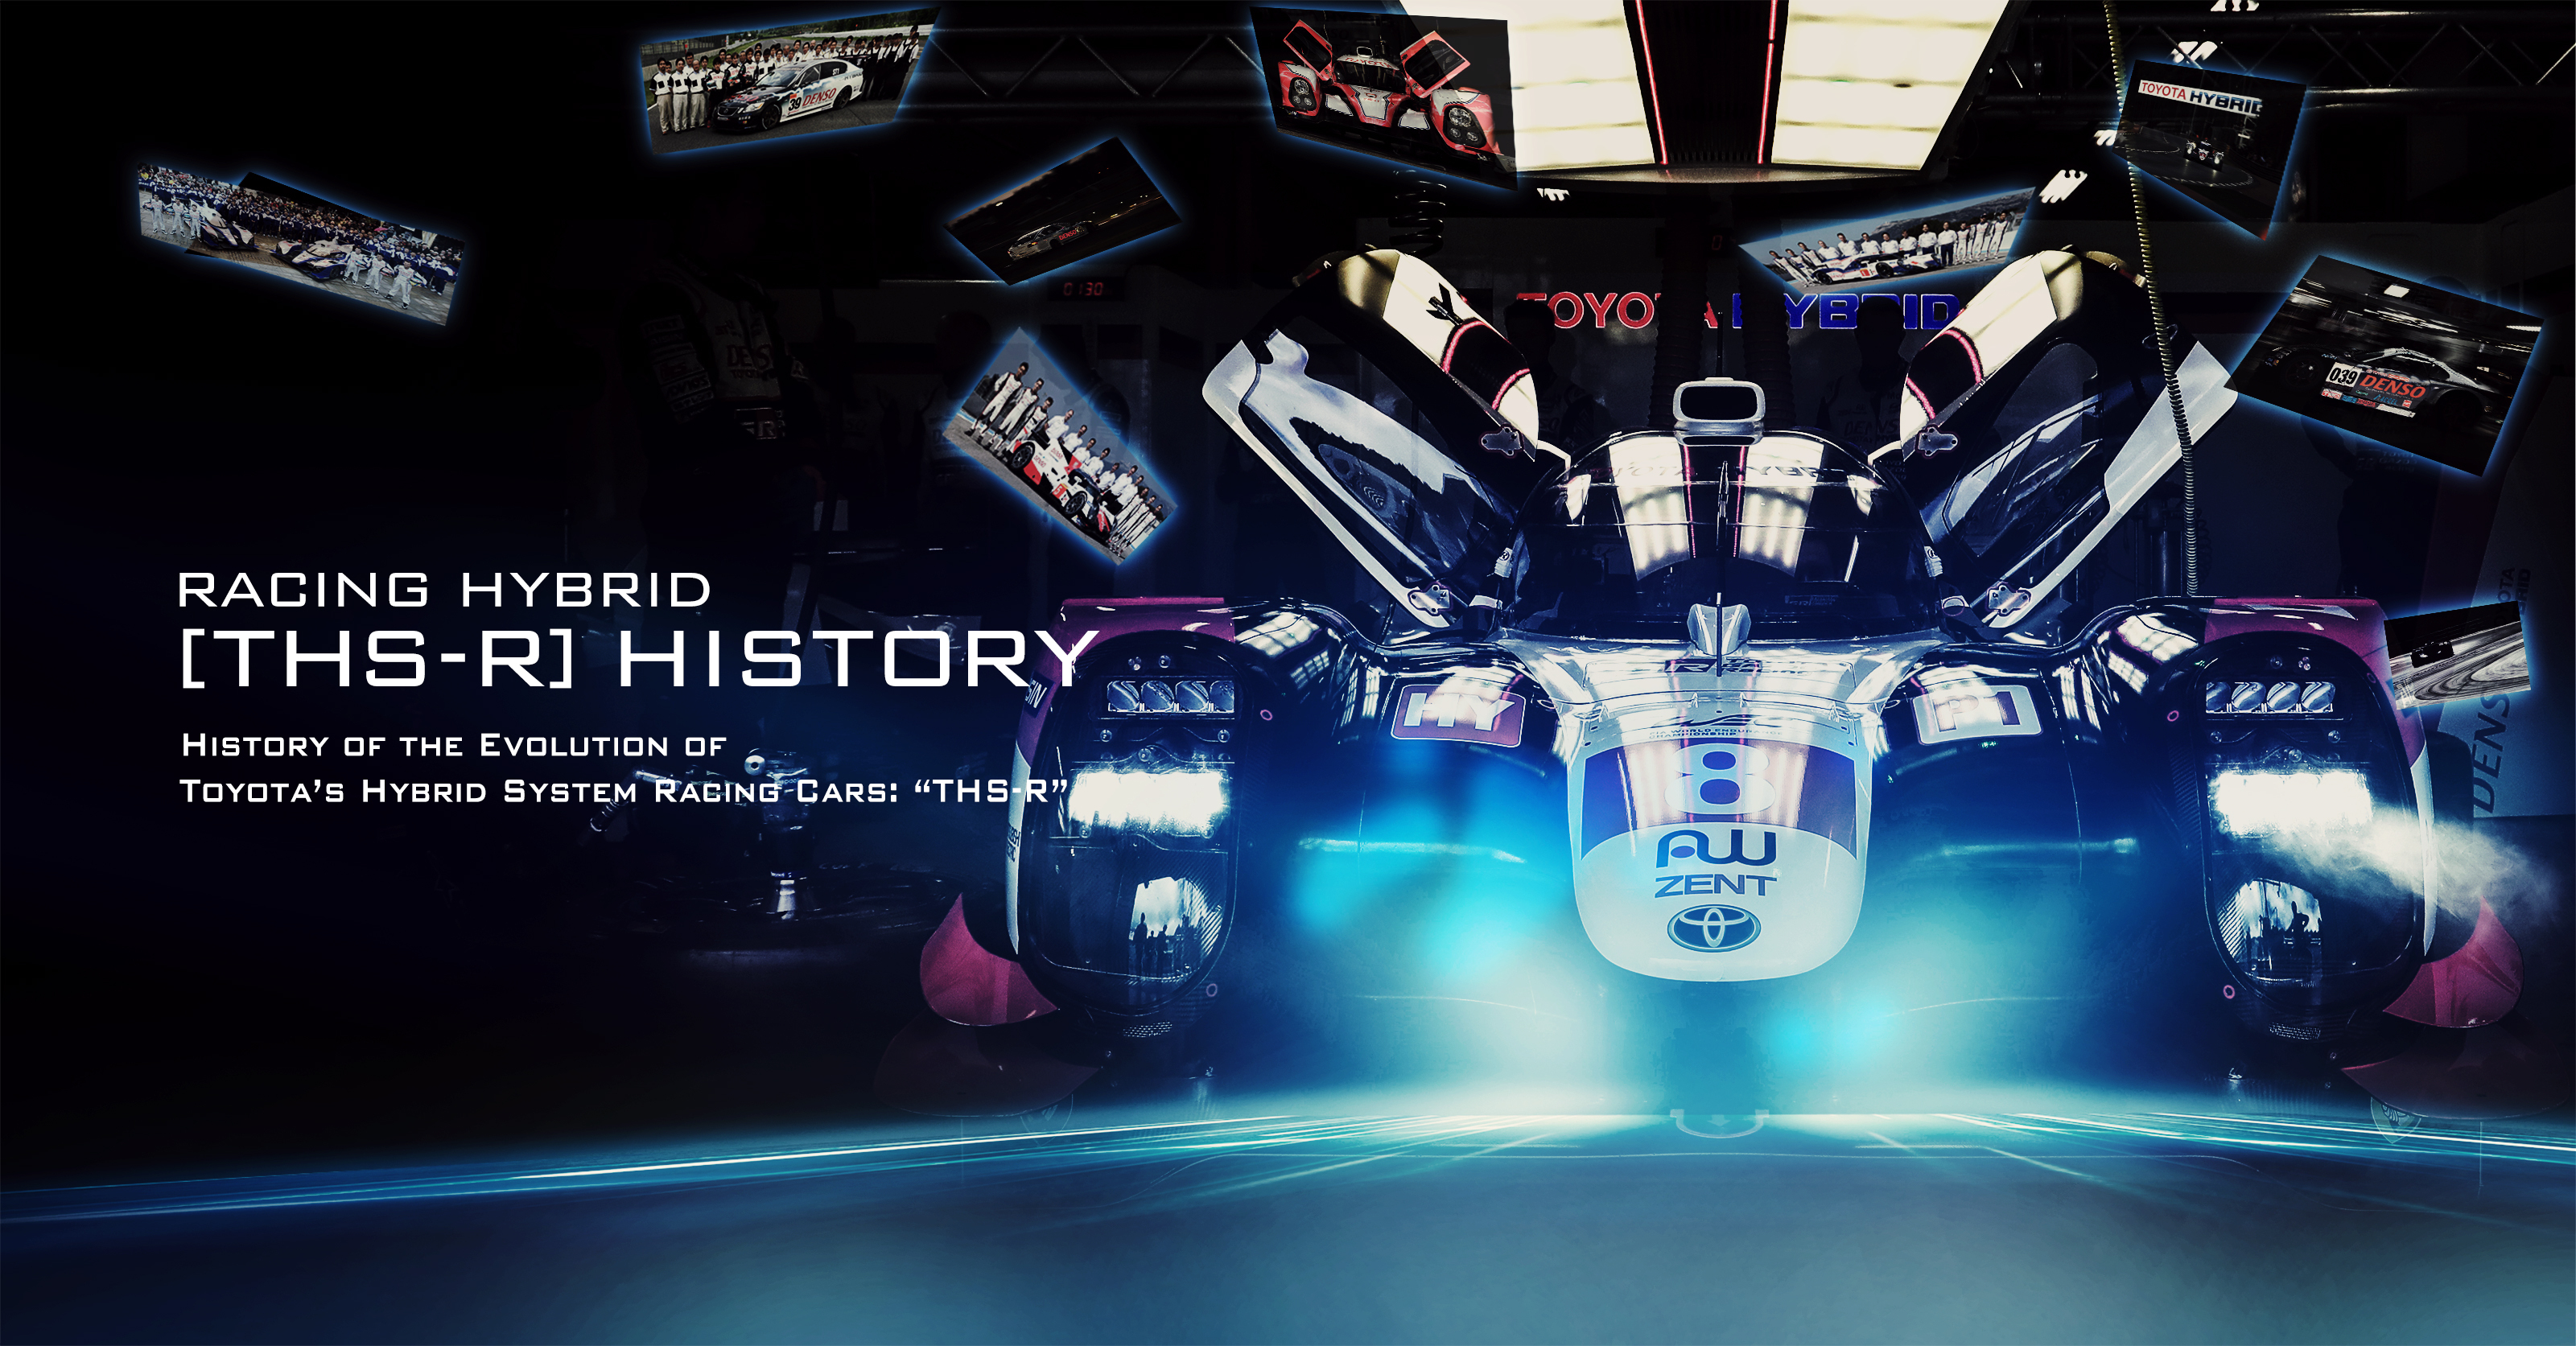 RACING HYBRID [THS-R] HISTORY -History of the Evolution of Toyota's Hybrid System Racing Cars: THS-R -